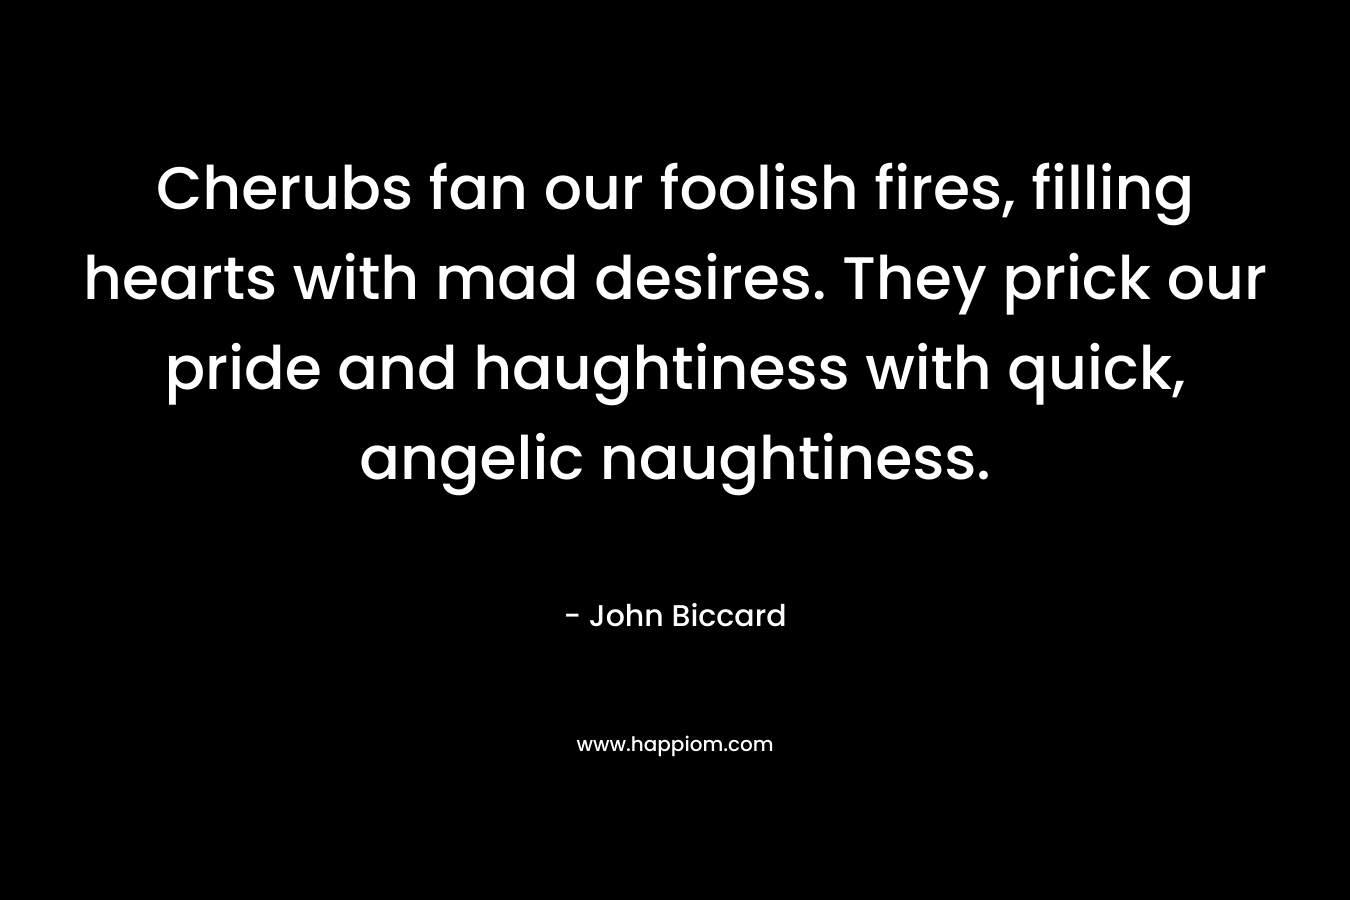 Cherubs fan our foolish fires, filling hearts with mad desires. They prick our pride and haughtiness with quick, angelic naughtiness.